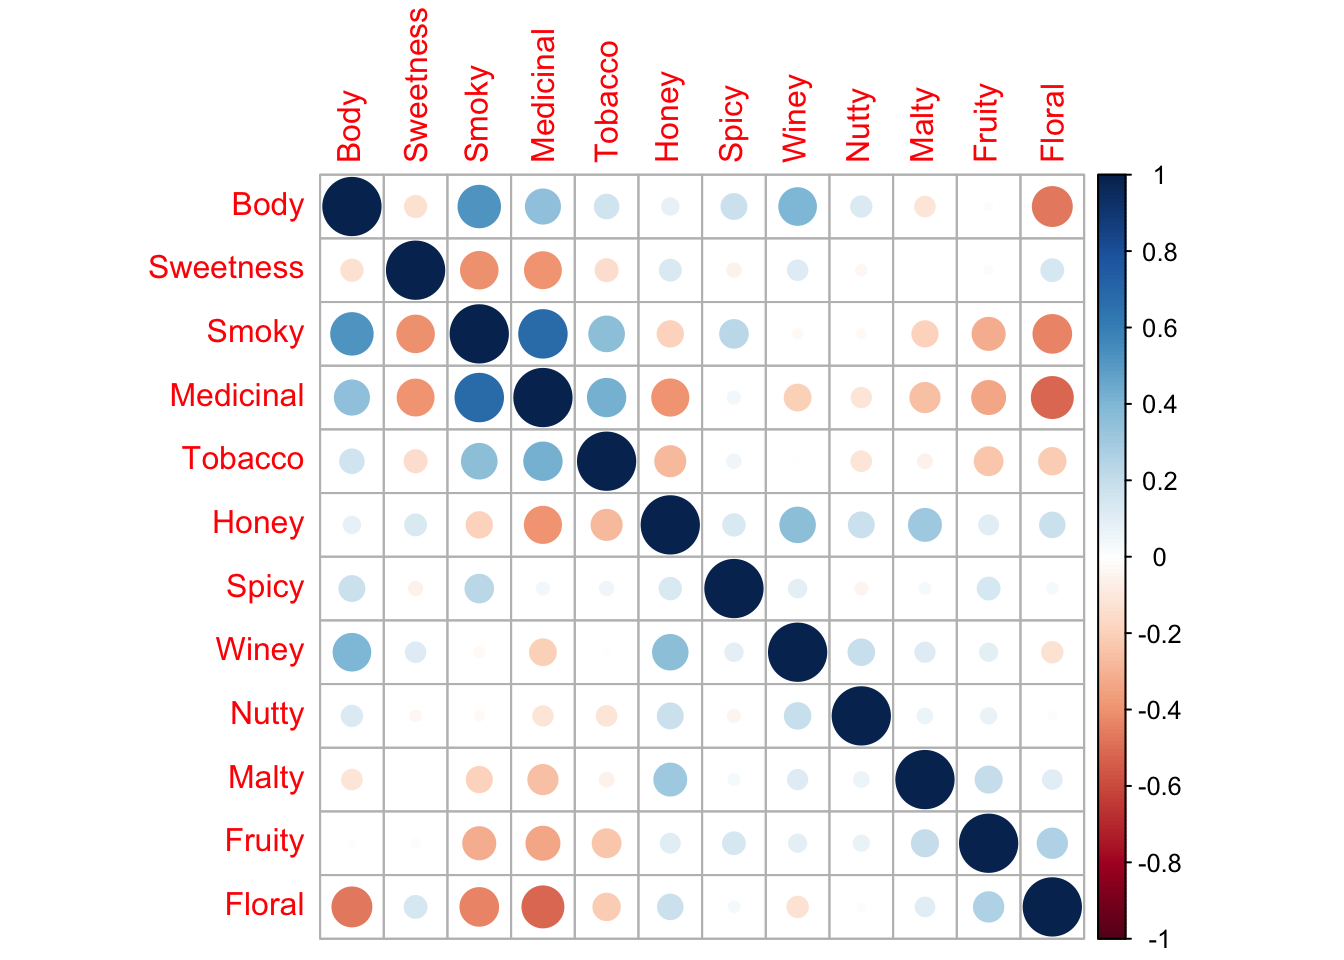 Correlation plots of each flavour characteristics from the corrplot package.